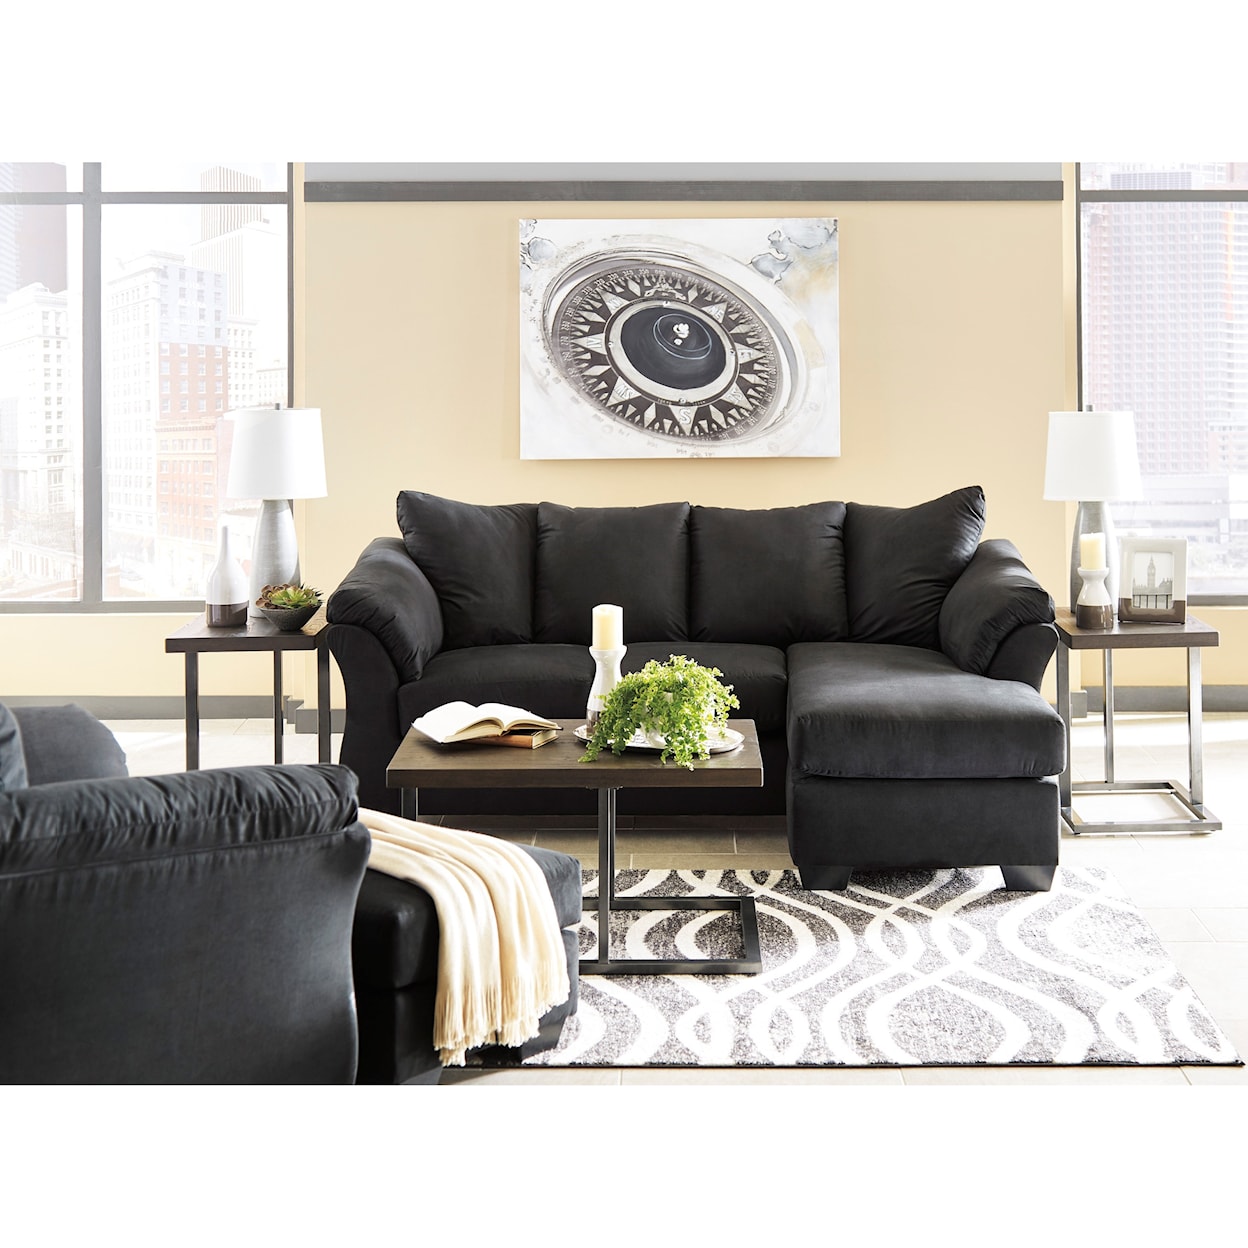 Ashley Furniture Signature Design Darcy Stationary Living Room Group